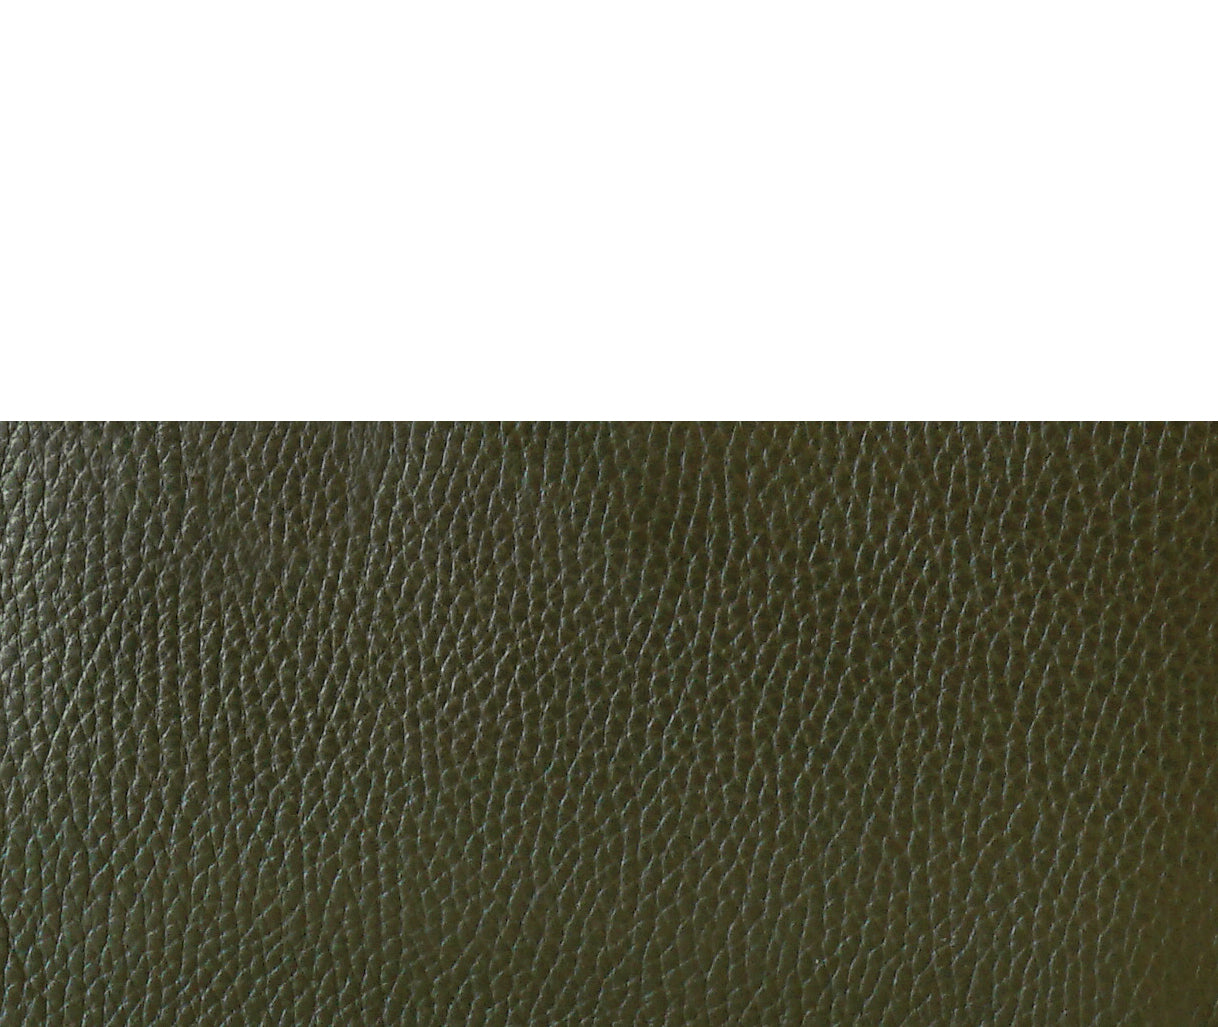 K CLUTCH LEATHER MILITARY - ISABELLA KRON